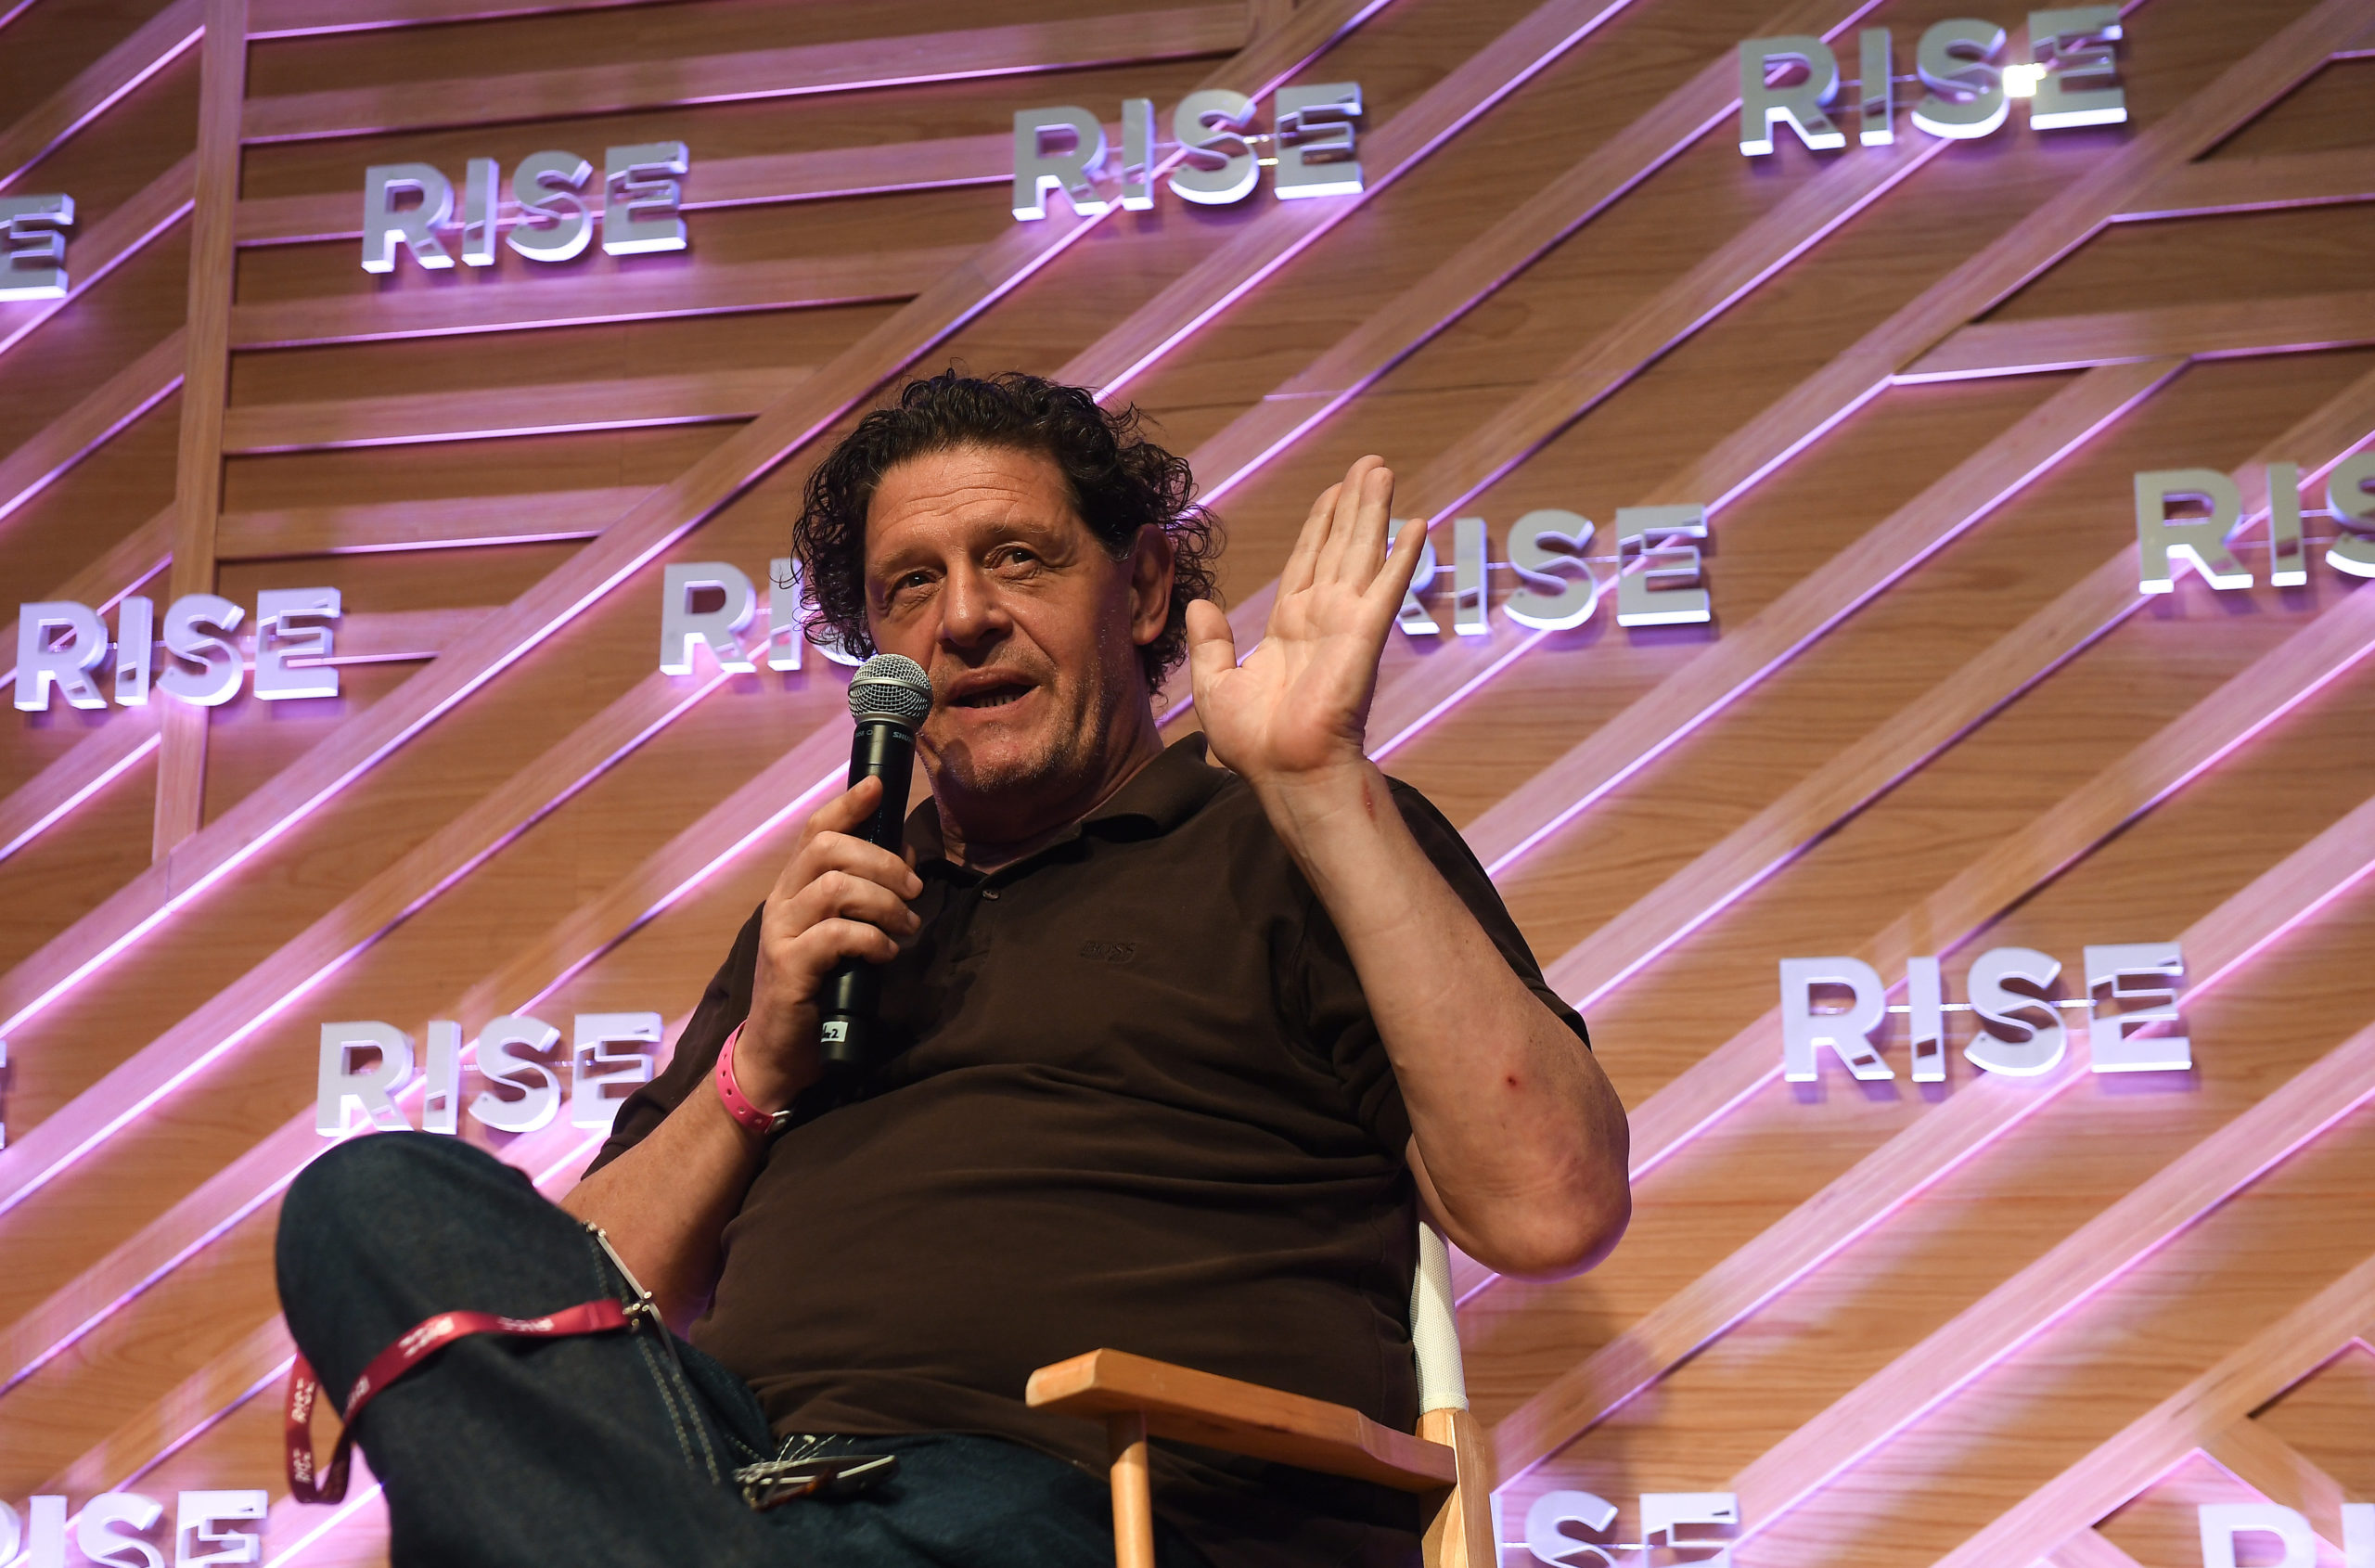 The celebrity chef Marco Pierre White is sitting in a chair. He is holding a microphone in one hand and is holding up the other palm. Behind him is a diagonal striped pink and brown wall with the RISE logo all over it.